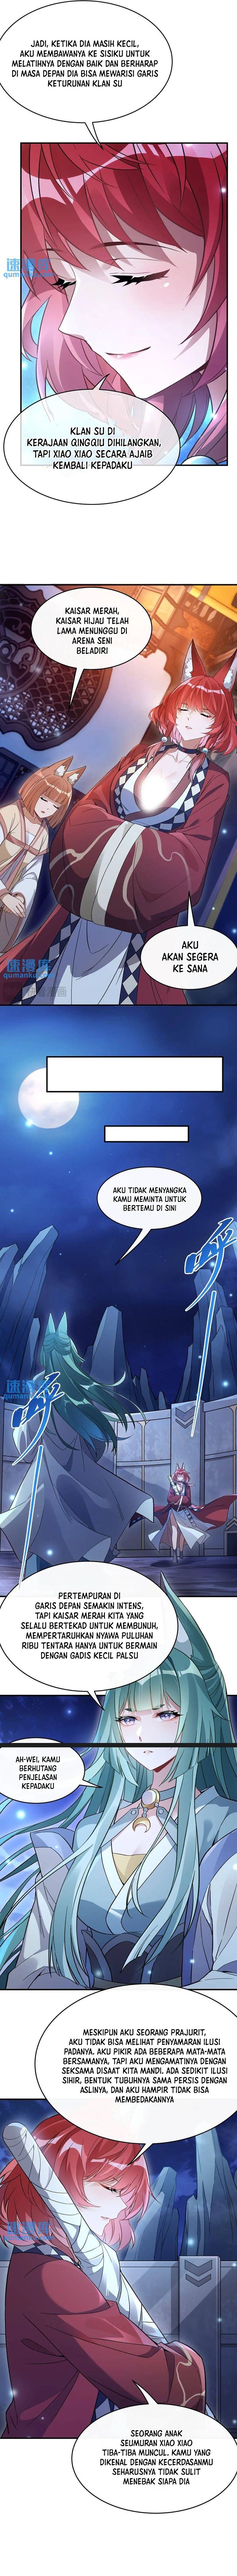 Dilarang COPAS - situs resmi www.mangacanblog.com - Komik my female apprentices are all big shots from the future 210 - chapter 210 211 Indonesia my female apprentices are all big shots from the future 210 - chapter 210 Terbaru 5|Baca Manga Komik Indonesia|Mangacan